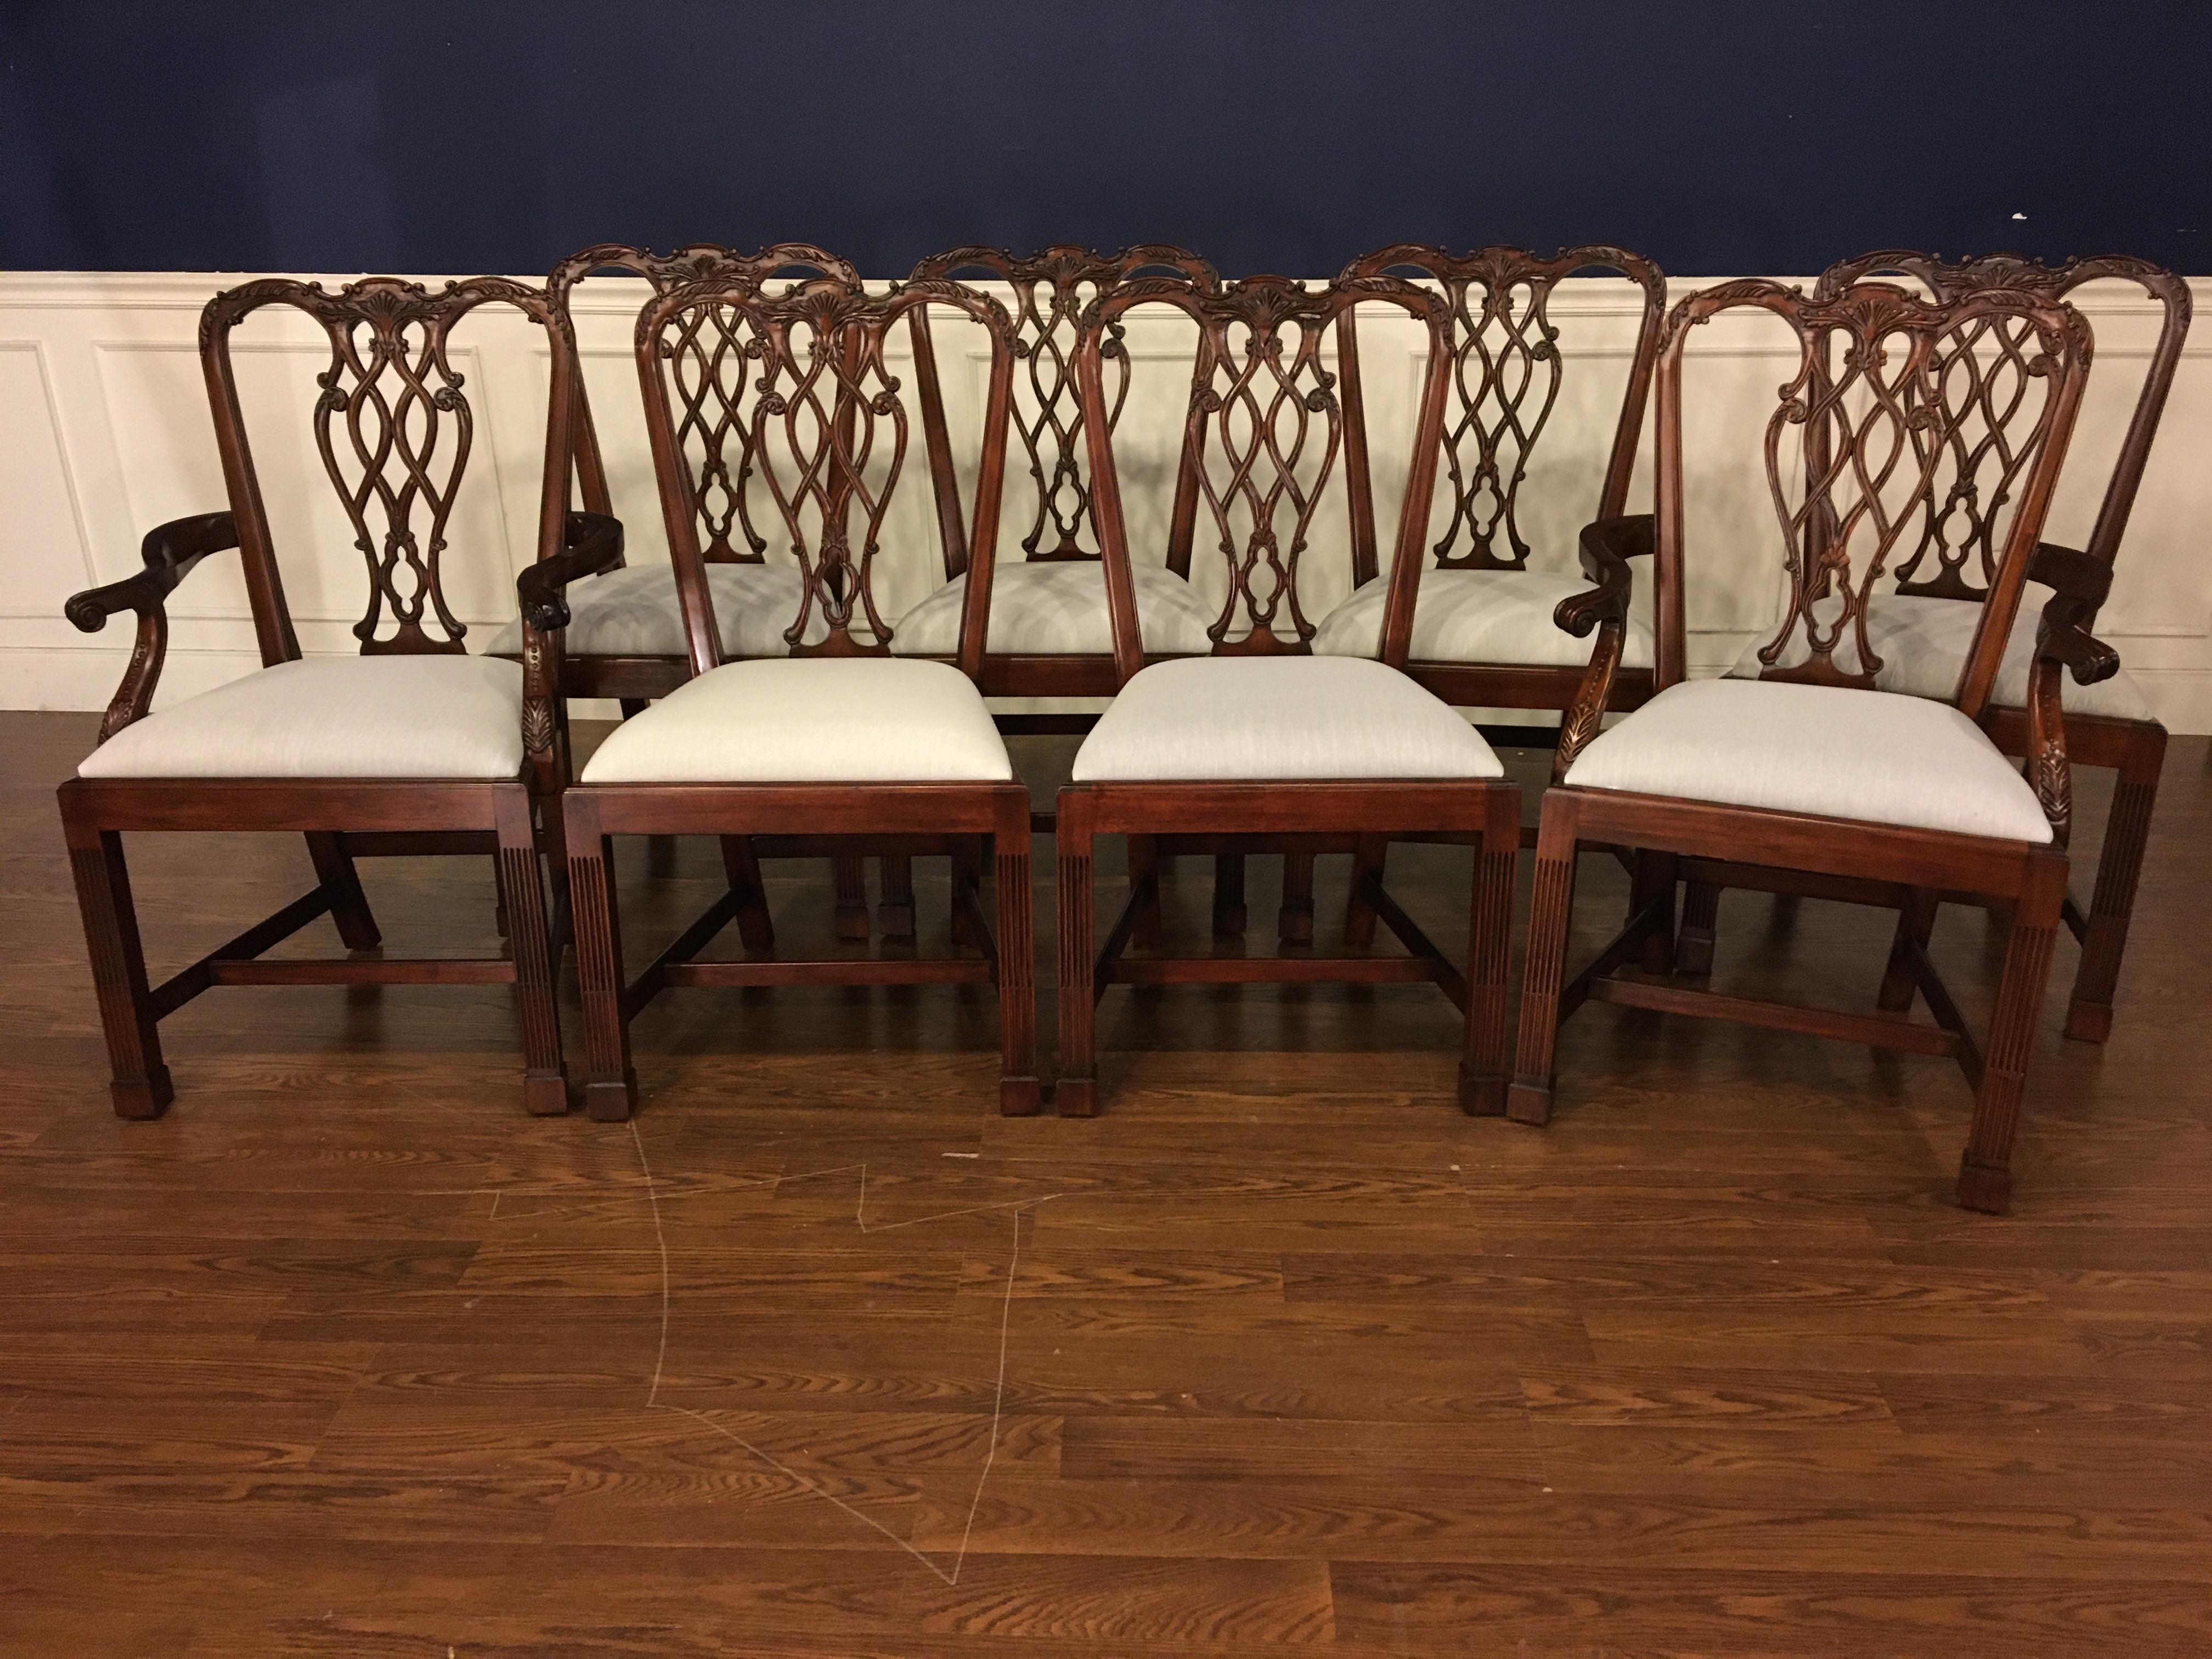 These are new traditional mahogany dining chairs. Their design was inspired by the English Chippendale style straight leg dining chairs from the Georgian period. They feature Classic Marlborough Chippendale styling with fluted legs and curved backs.